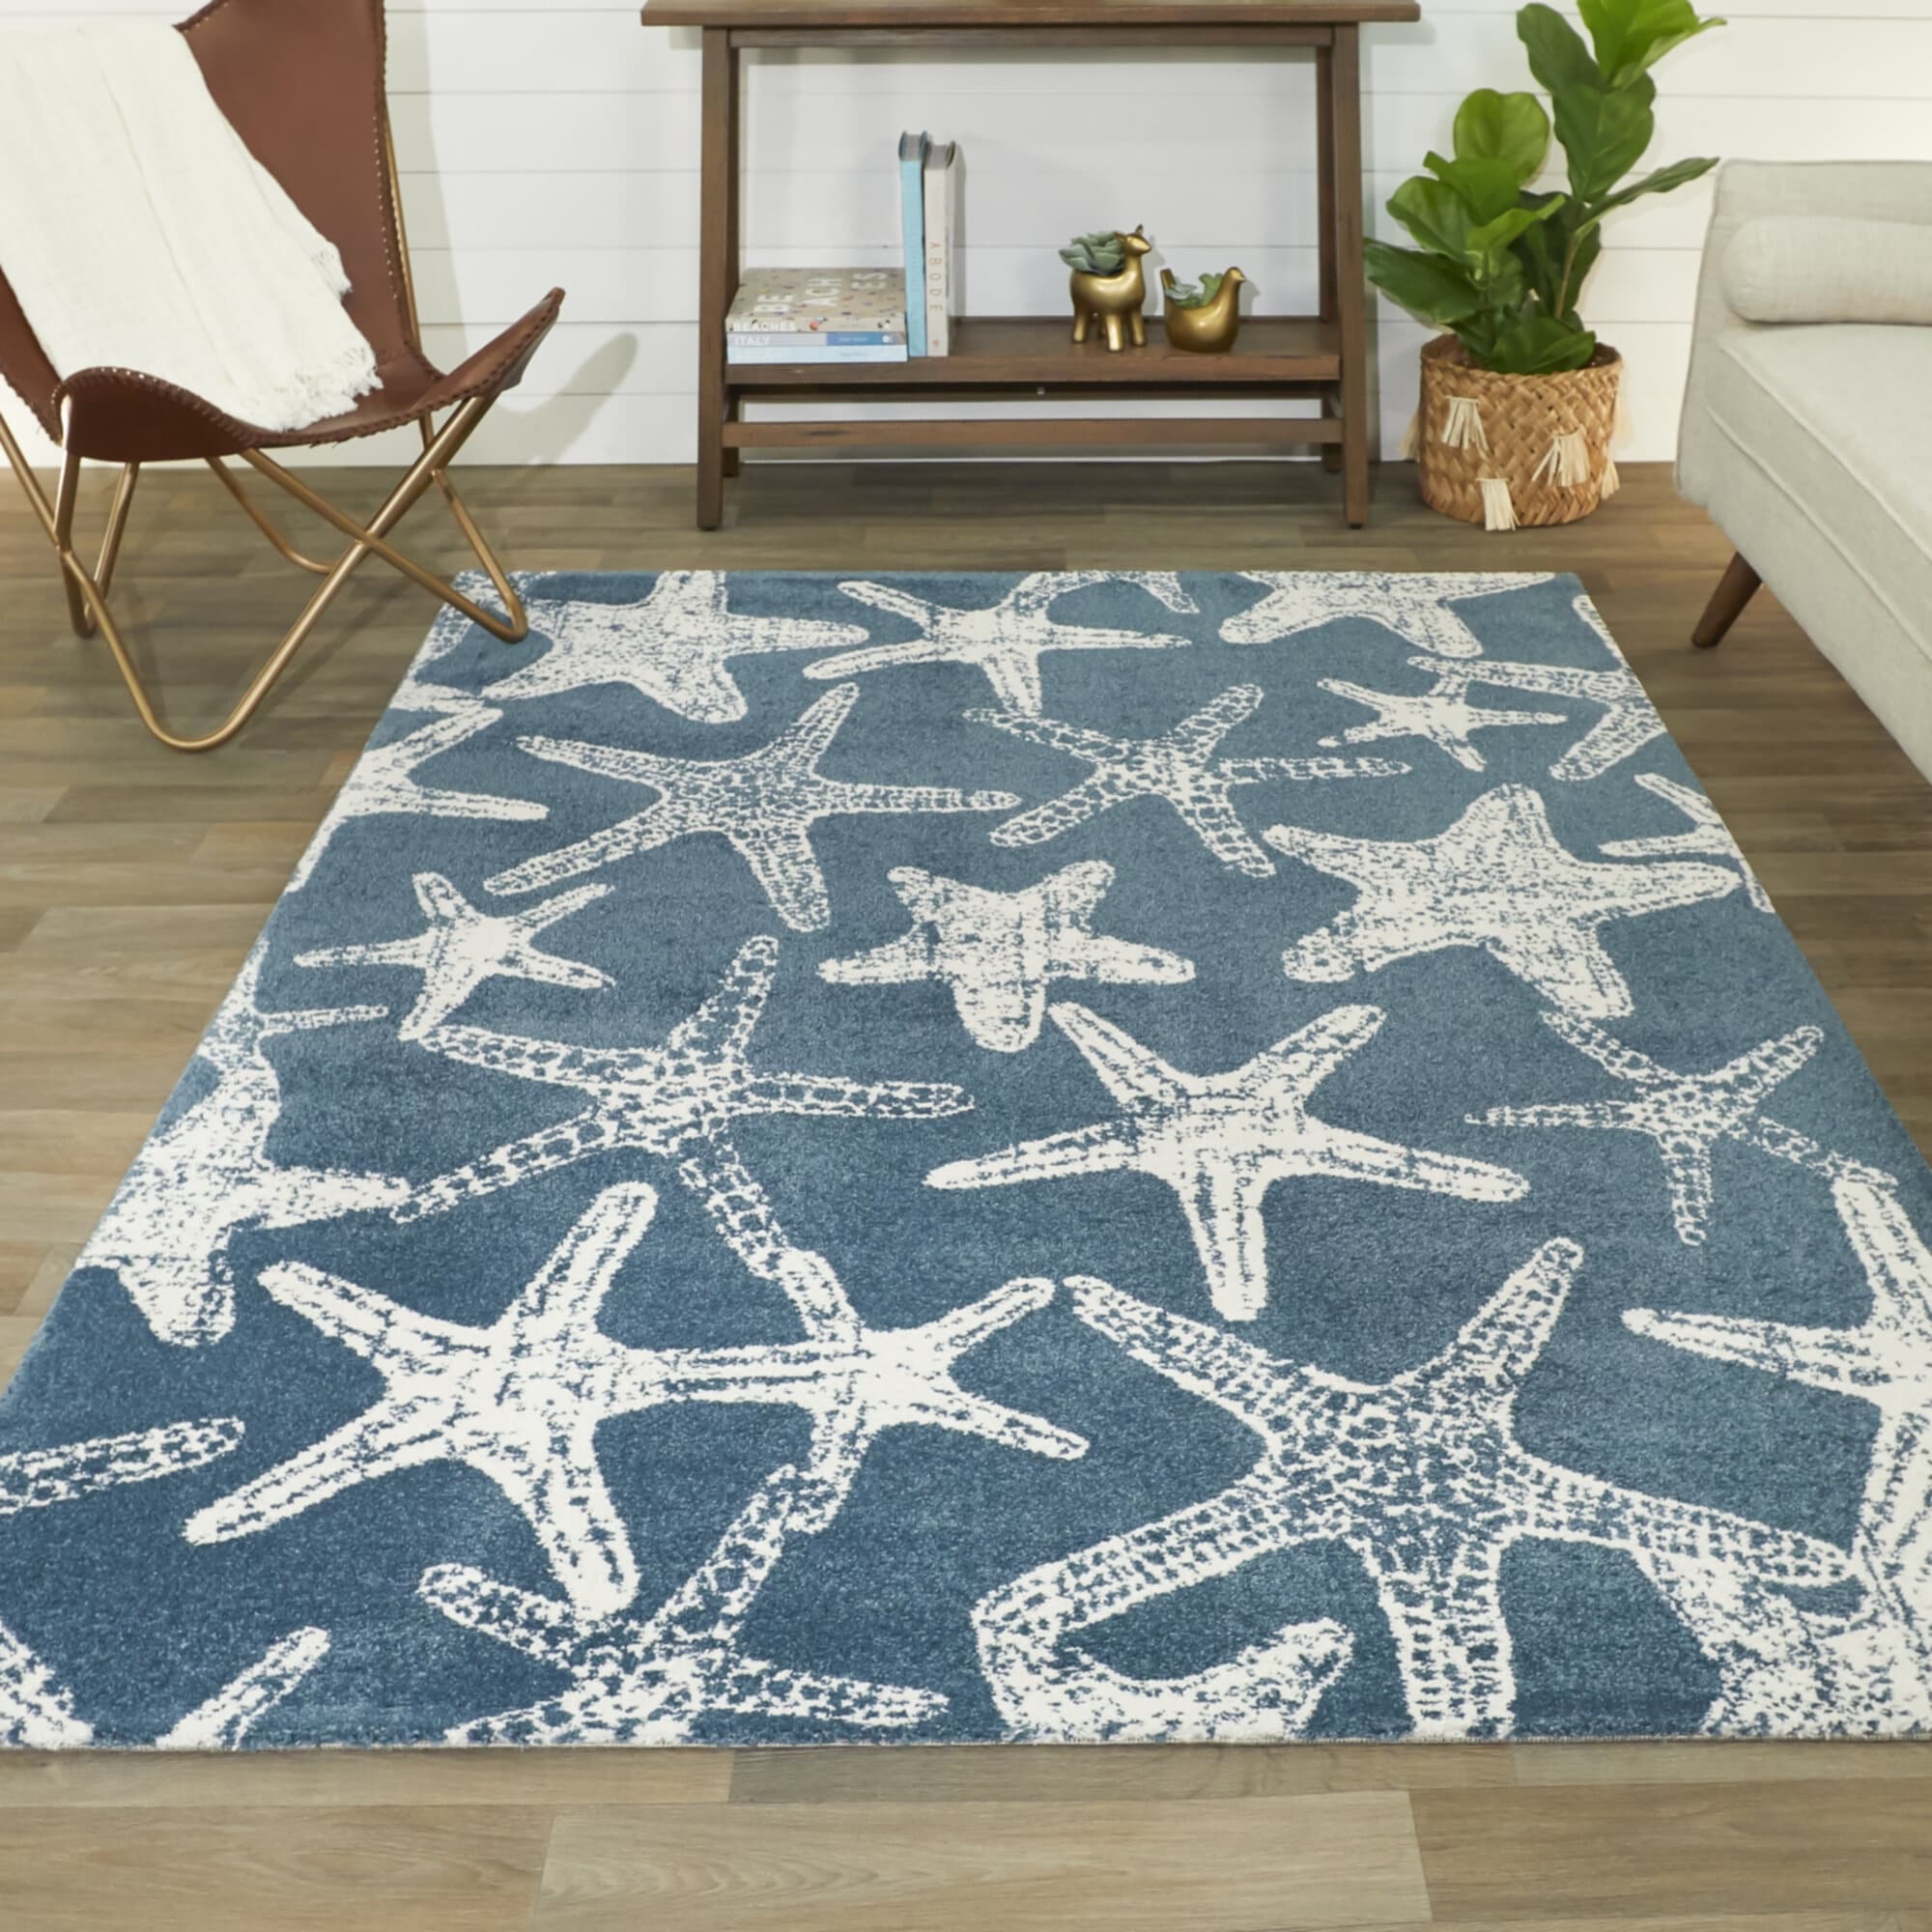 https://ak1.ostkcdn.com/images/products/is/images/direct/525868fae653ea46c467445d41454fe013380c91/Leyton-Nautical-Solid-Starfish-Coastal-Area-Rug.jpg